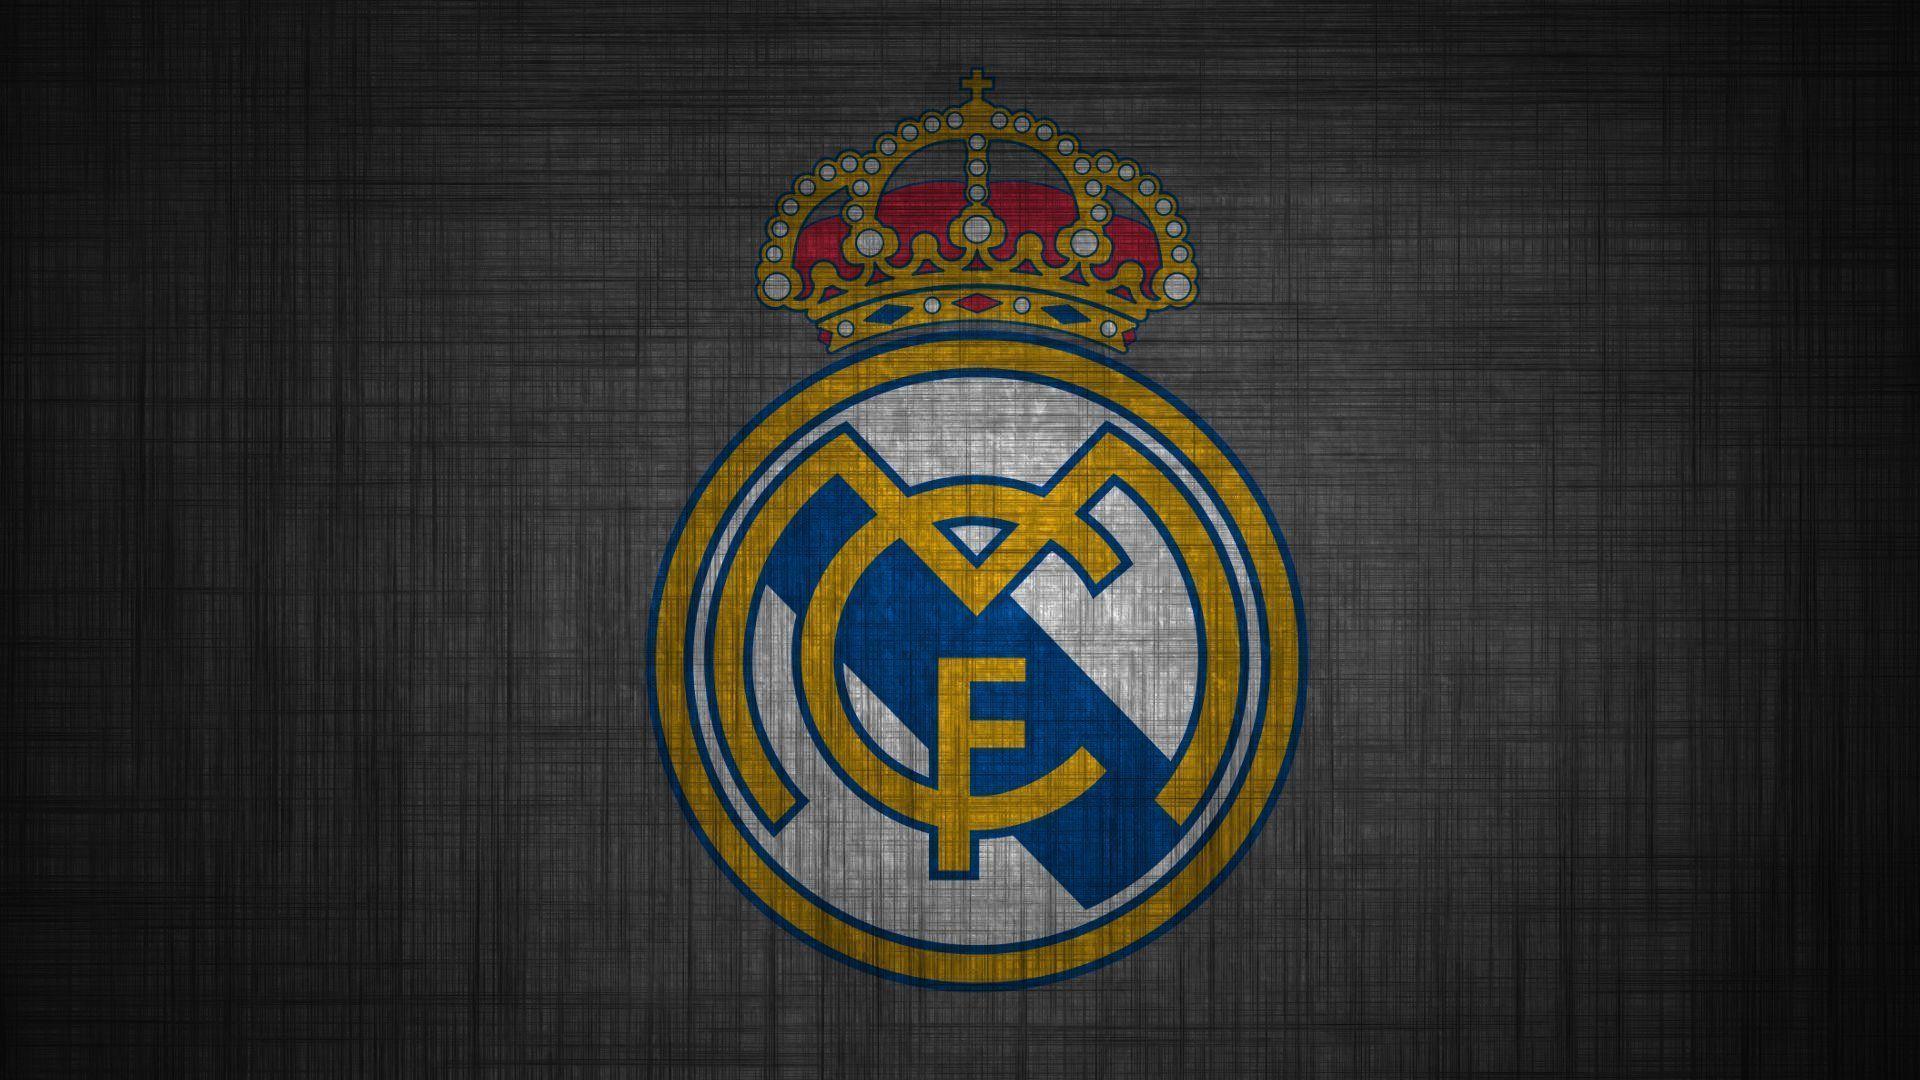 Real Madrid Wallpapers HD